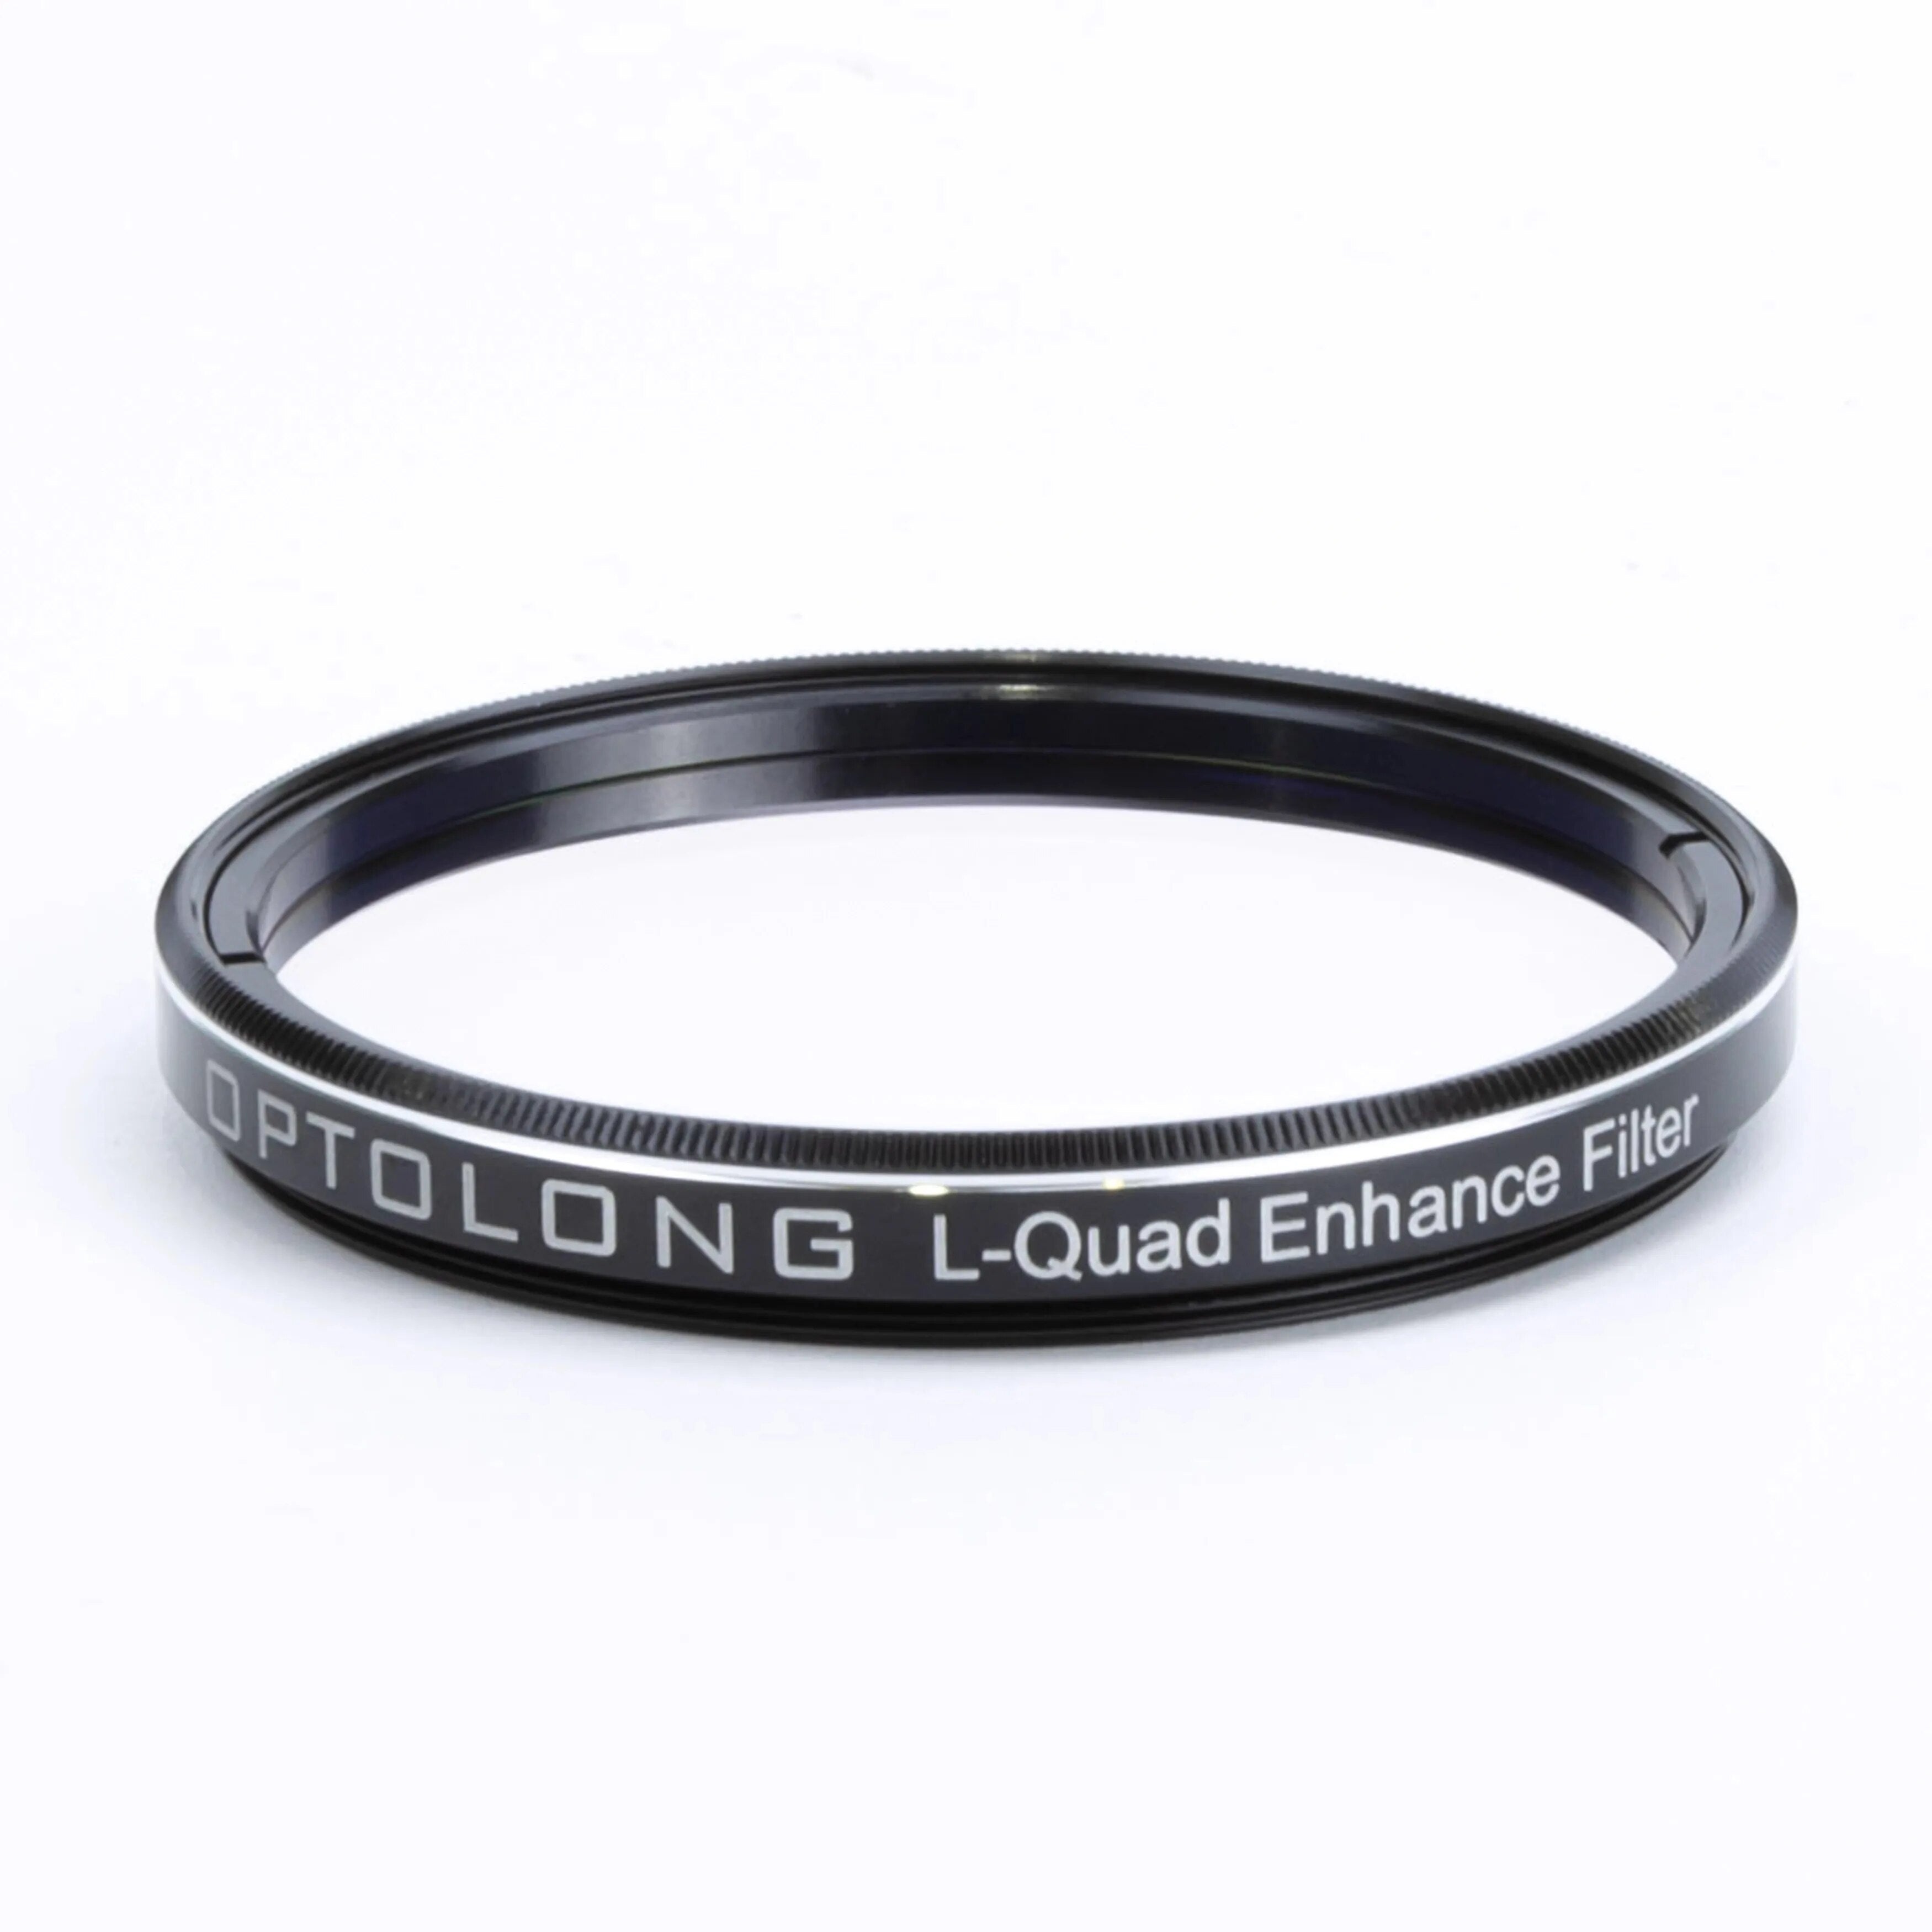 OPTOLONG L-eXtreme 2” 50.8mm M48 フィルター-